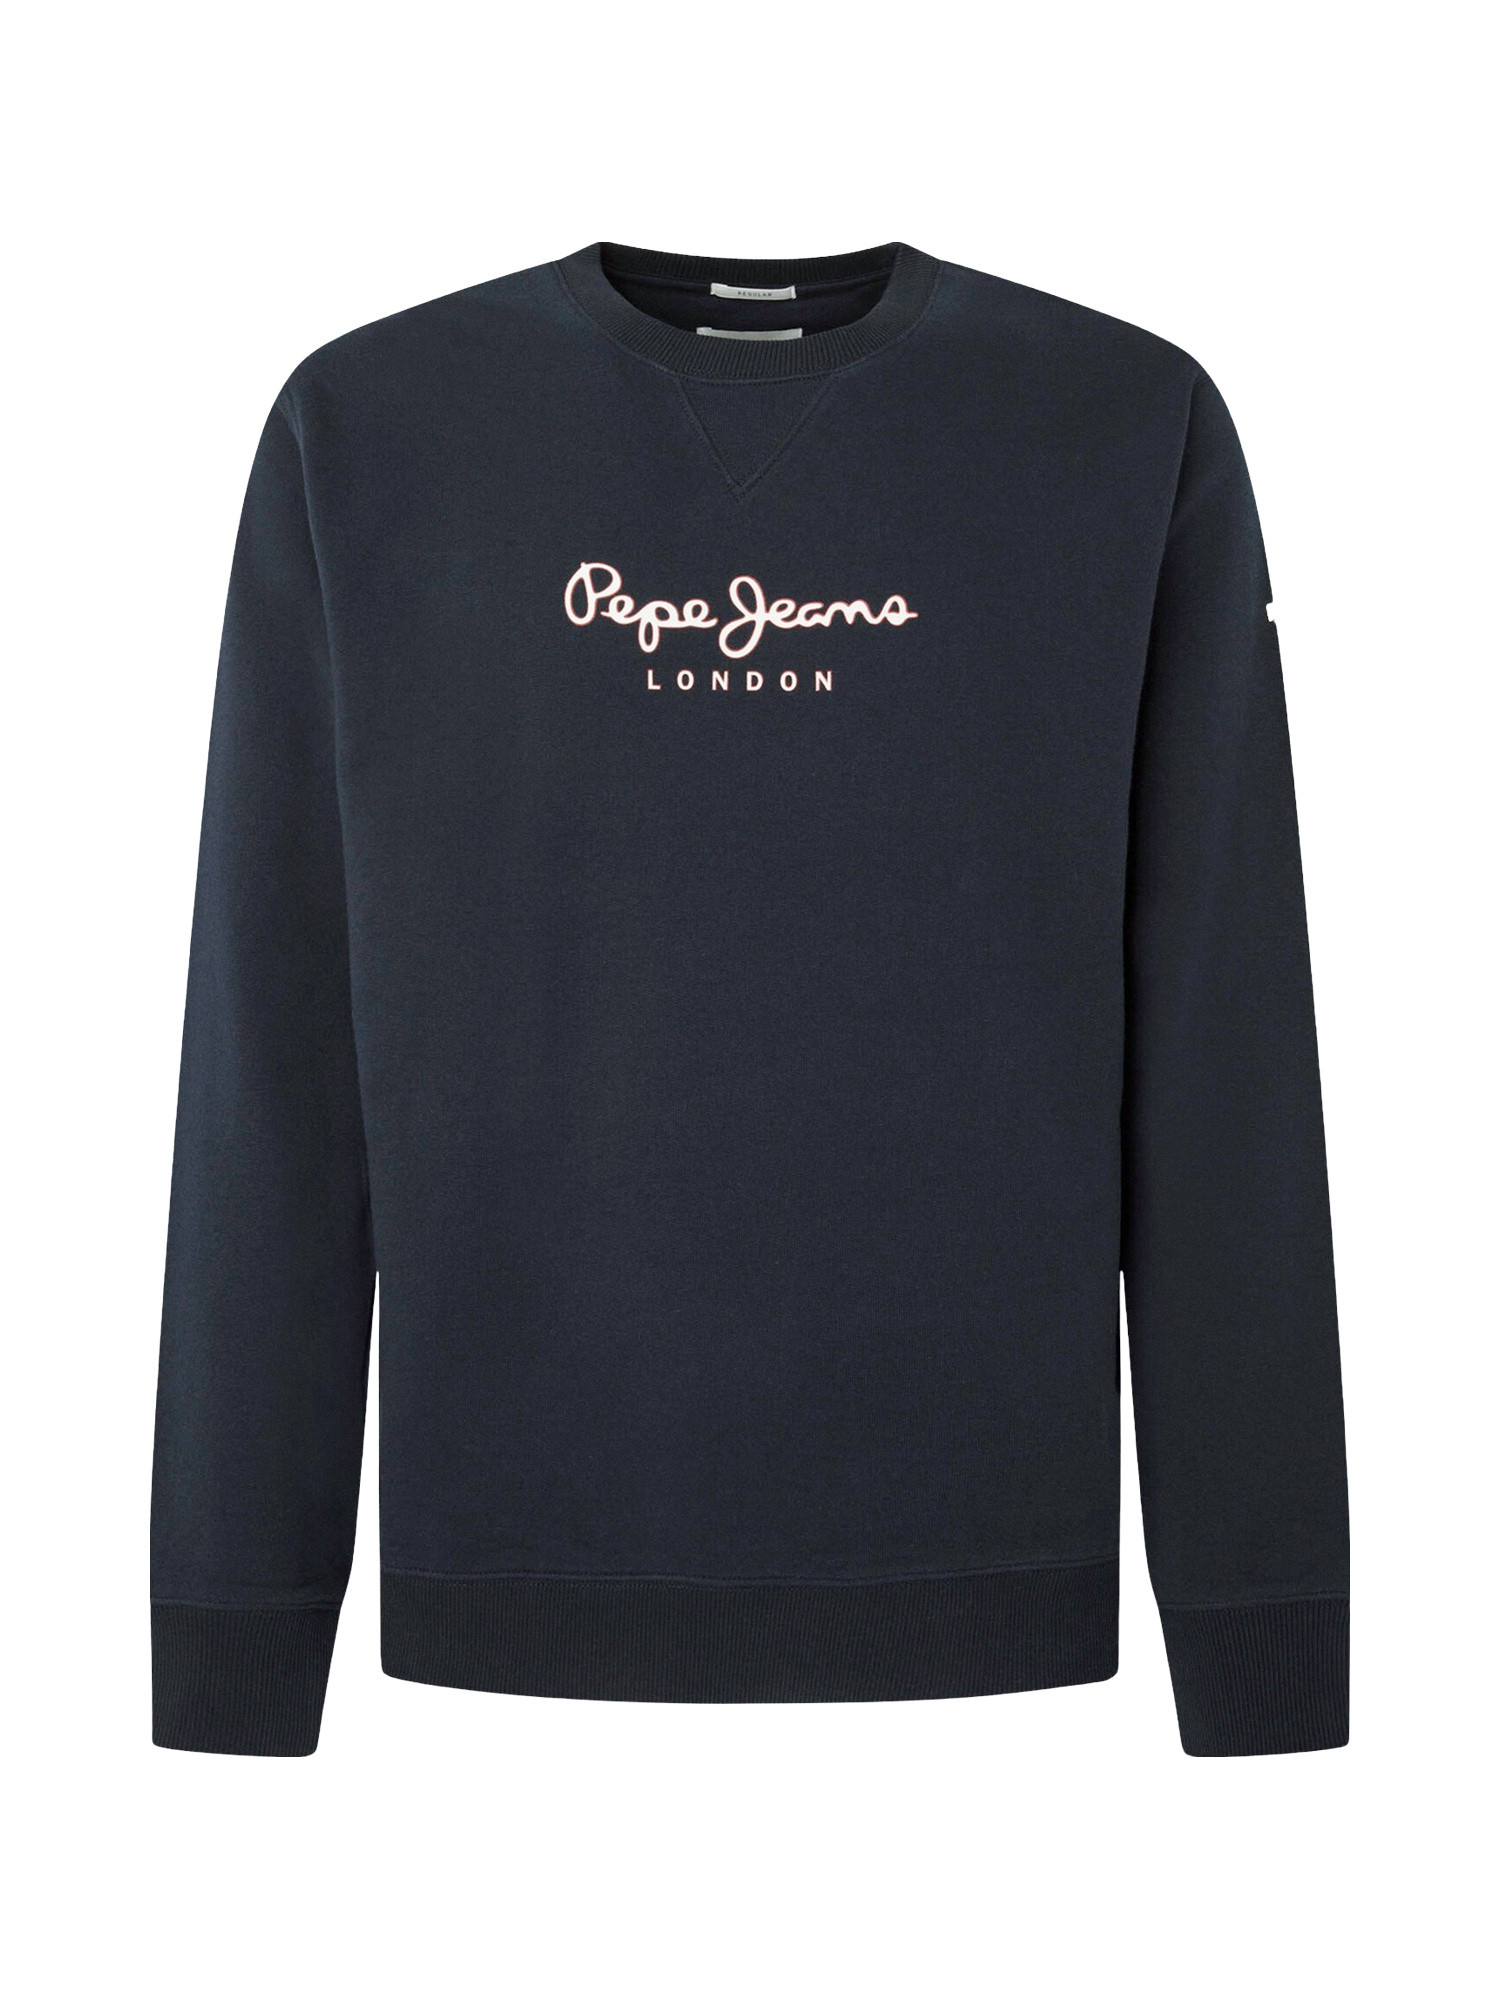 Pepe Jeans - Sweatshirt with logo in cotton, Dark Blue, large image number 0